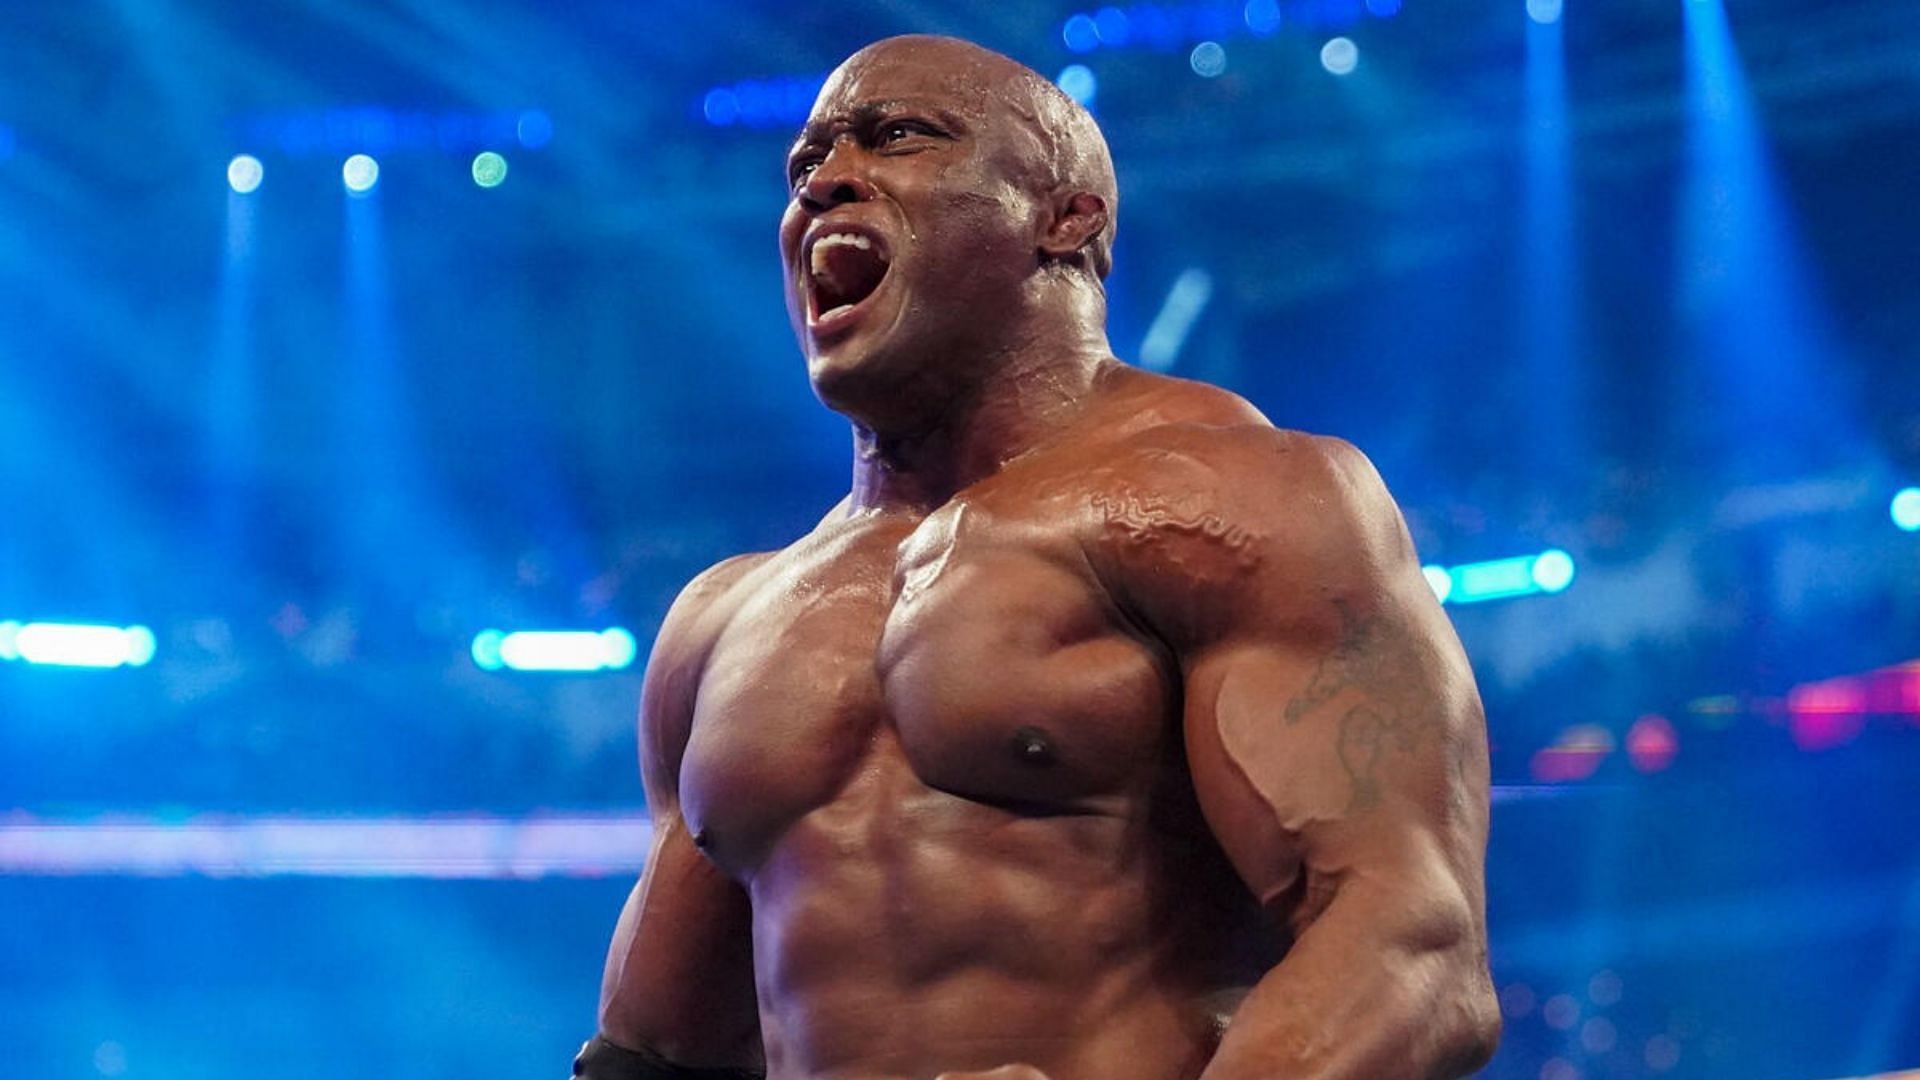 Bobby Lashley is one of the most dominant superstars in WWE